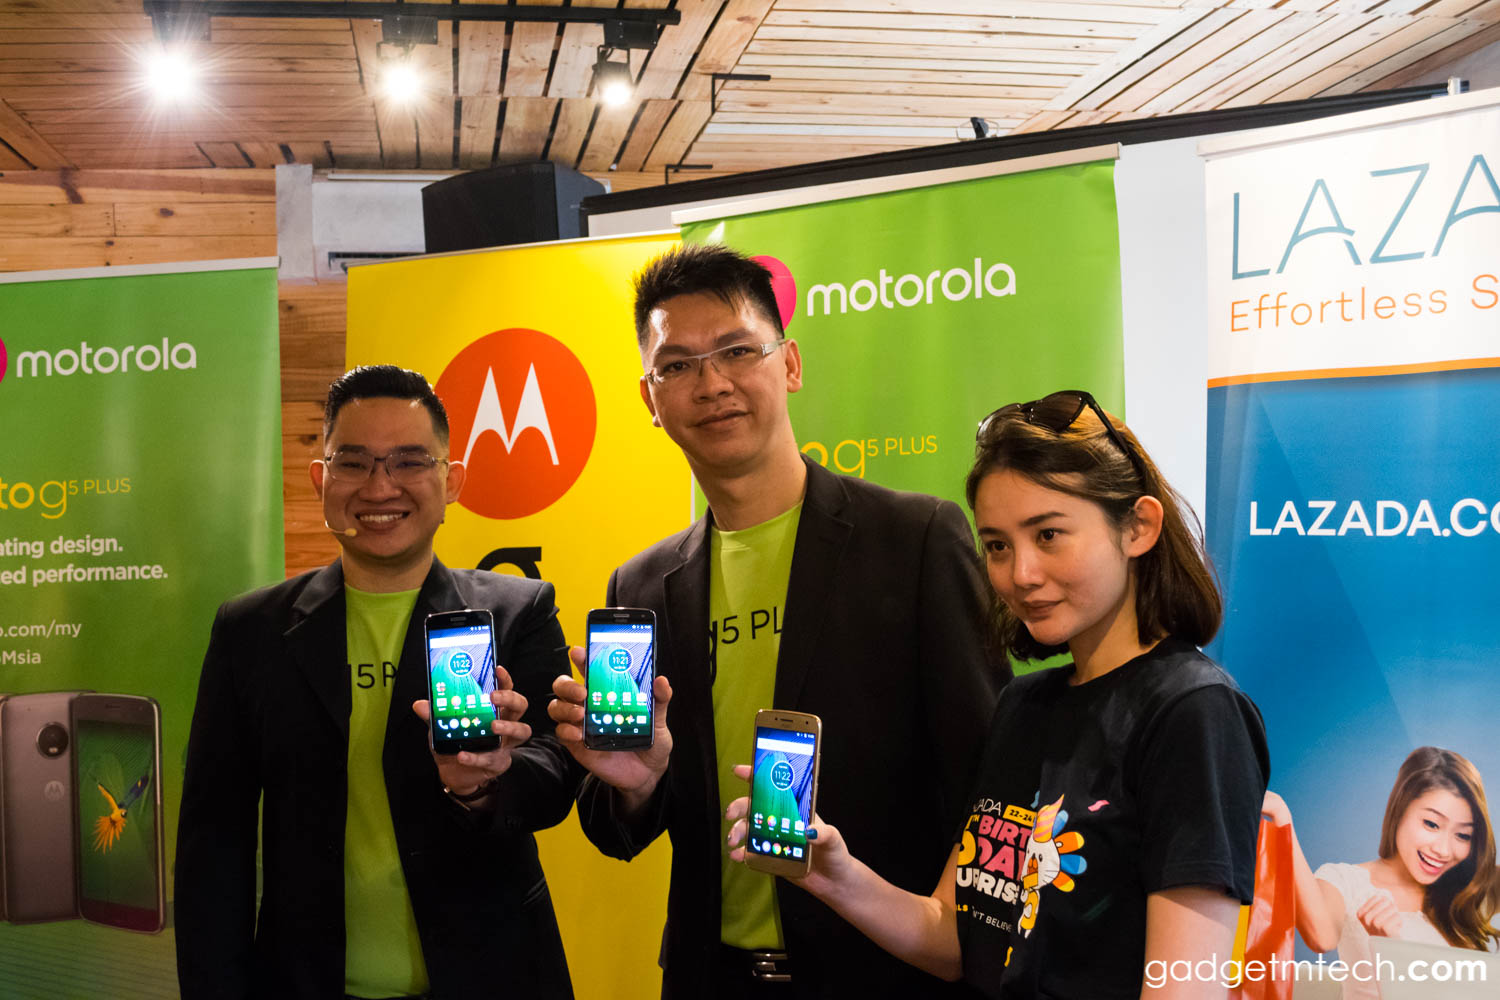 Moto G5 Plus Officially Launched in Malaysia